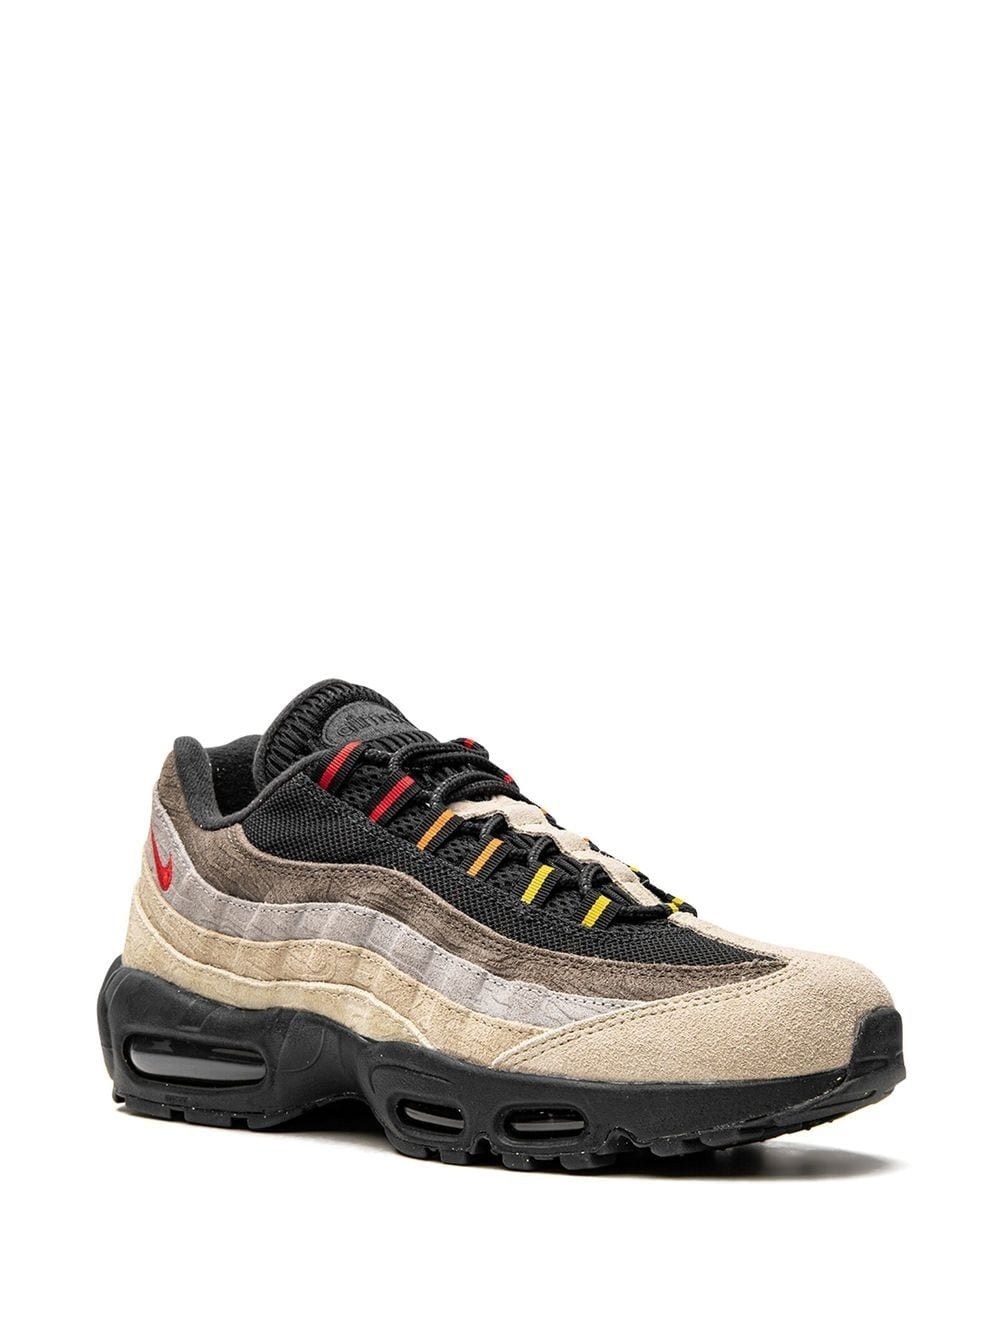 Air Max 95 "Topographic" sneakers - 2